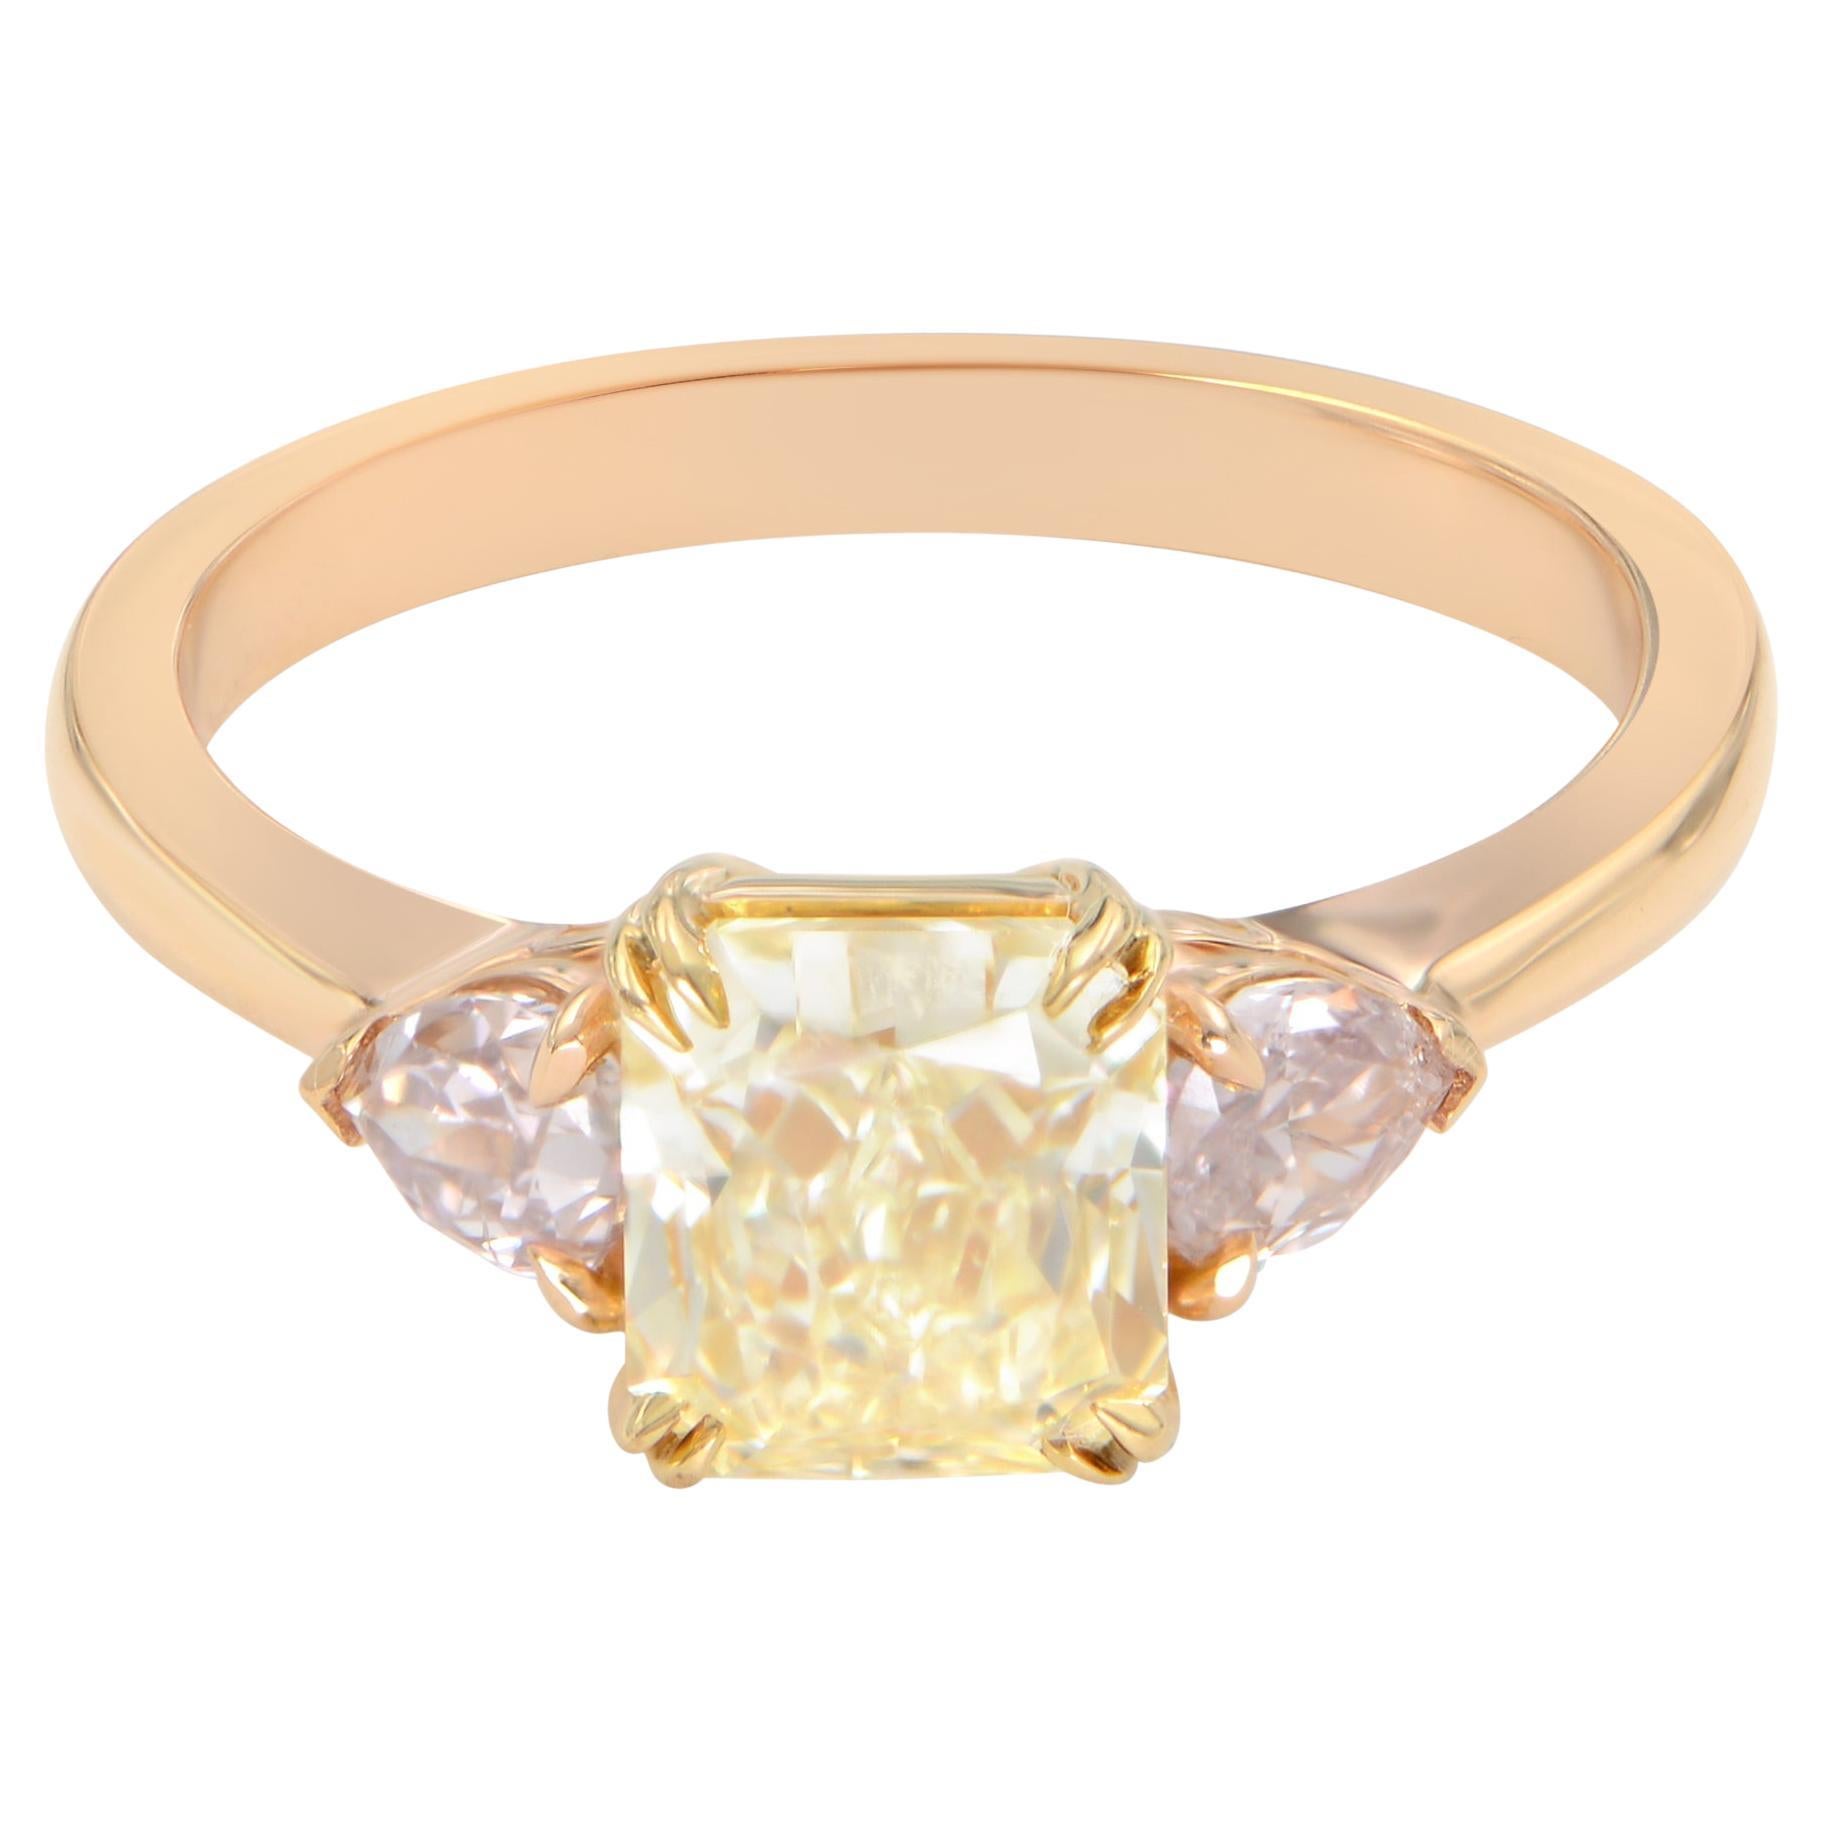 Rachel Koen 18K Yellow Gold Asscher and Pear Shaped Three-Stone Ring 1.37 Carat For Sale